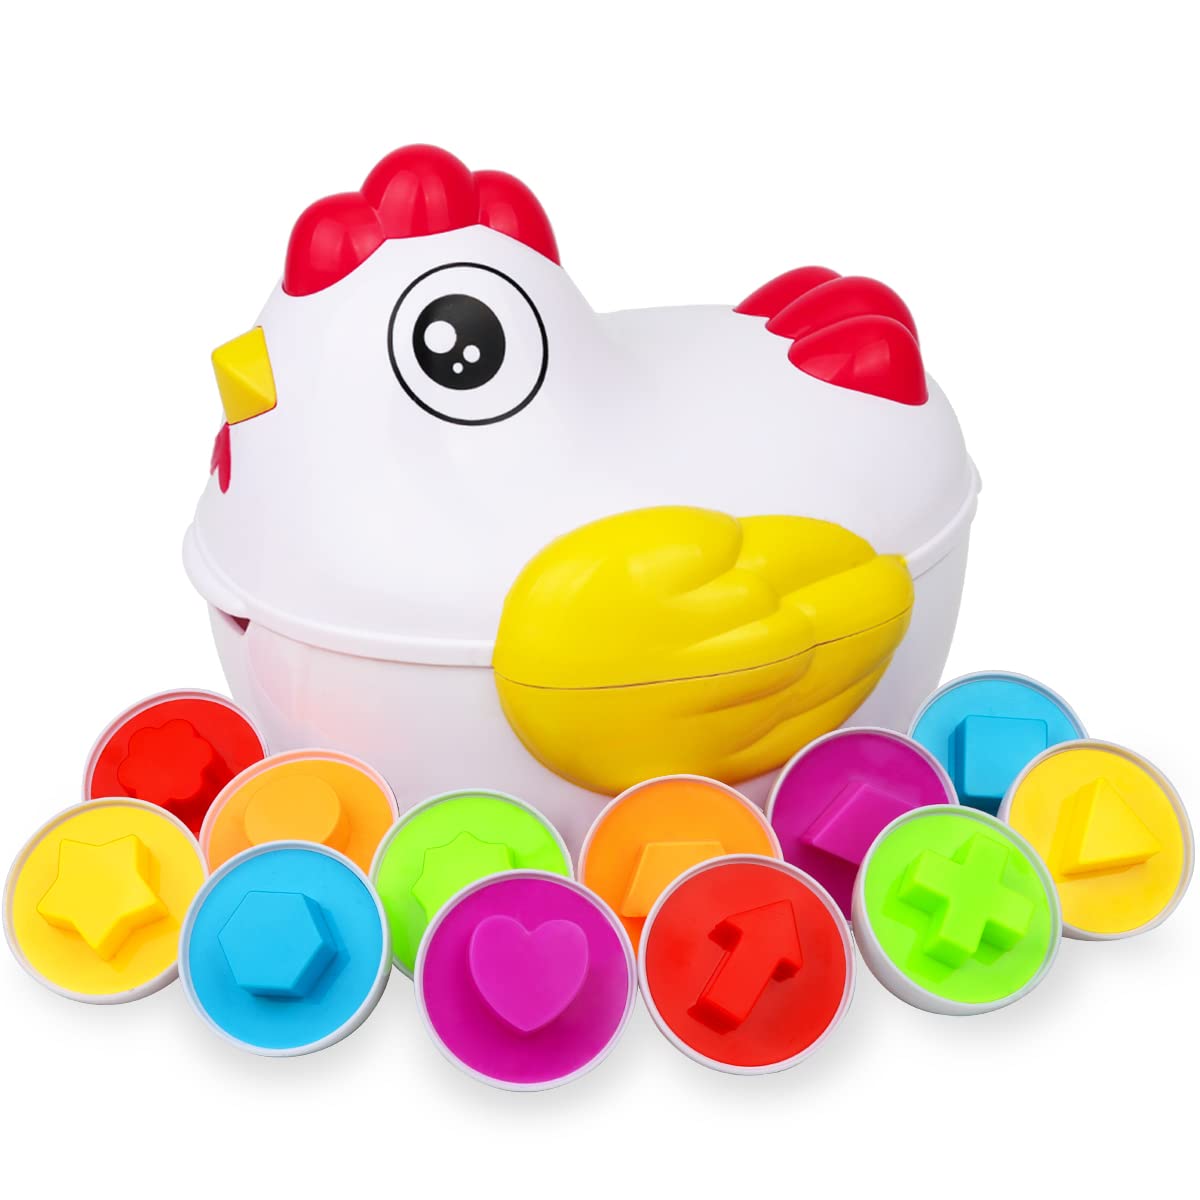 12 Matching Eggs Montessori Sensory Baby Toys Easter Eggs Chicken Colors